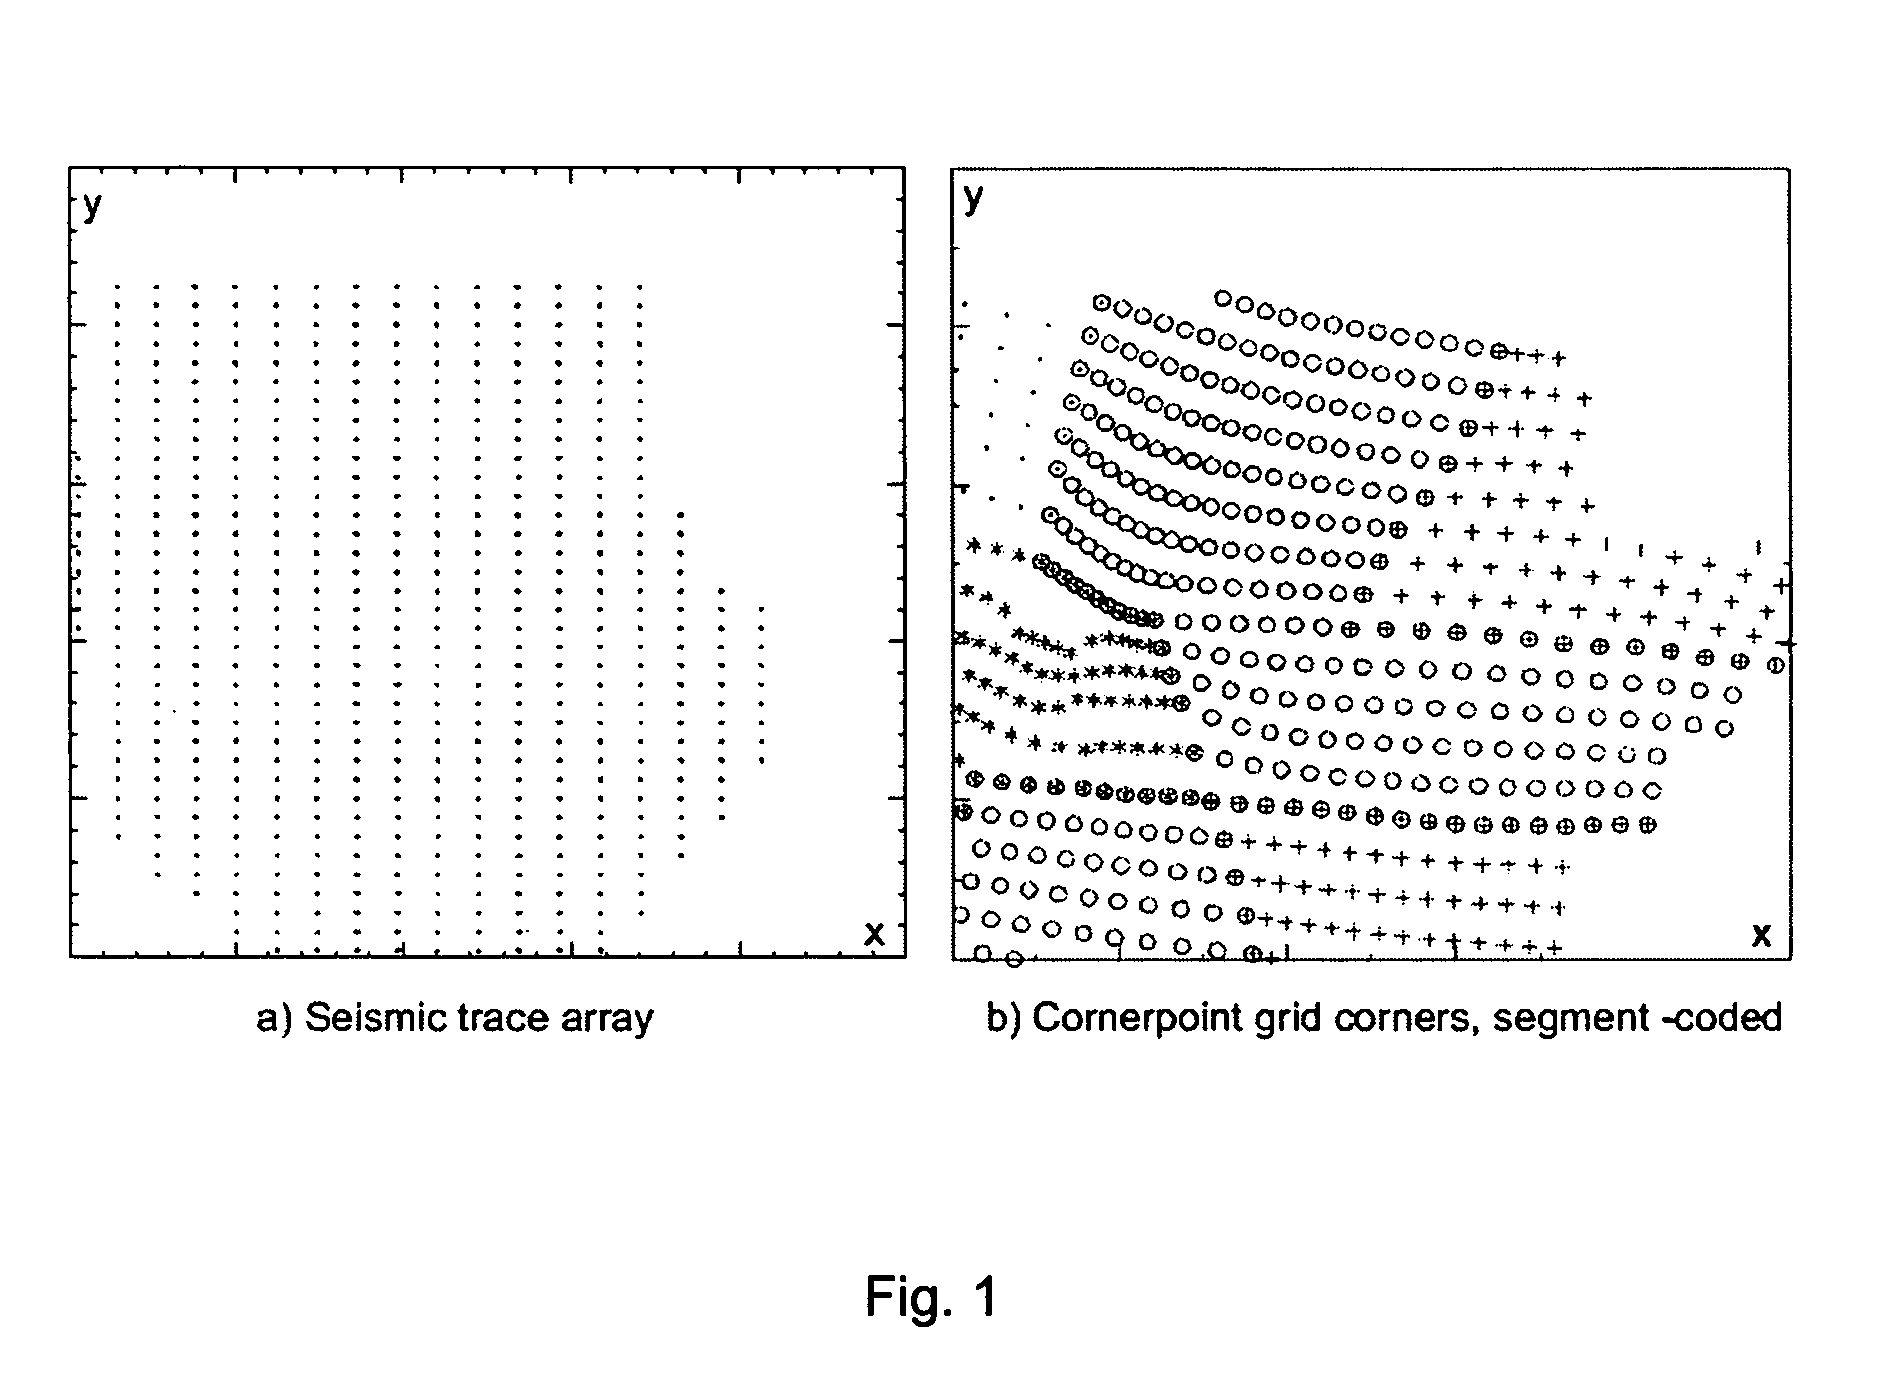 Method for estimating and/or reducing uncertainty in reservoir models of potential petroleum reservoirs